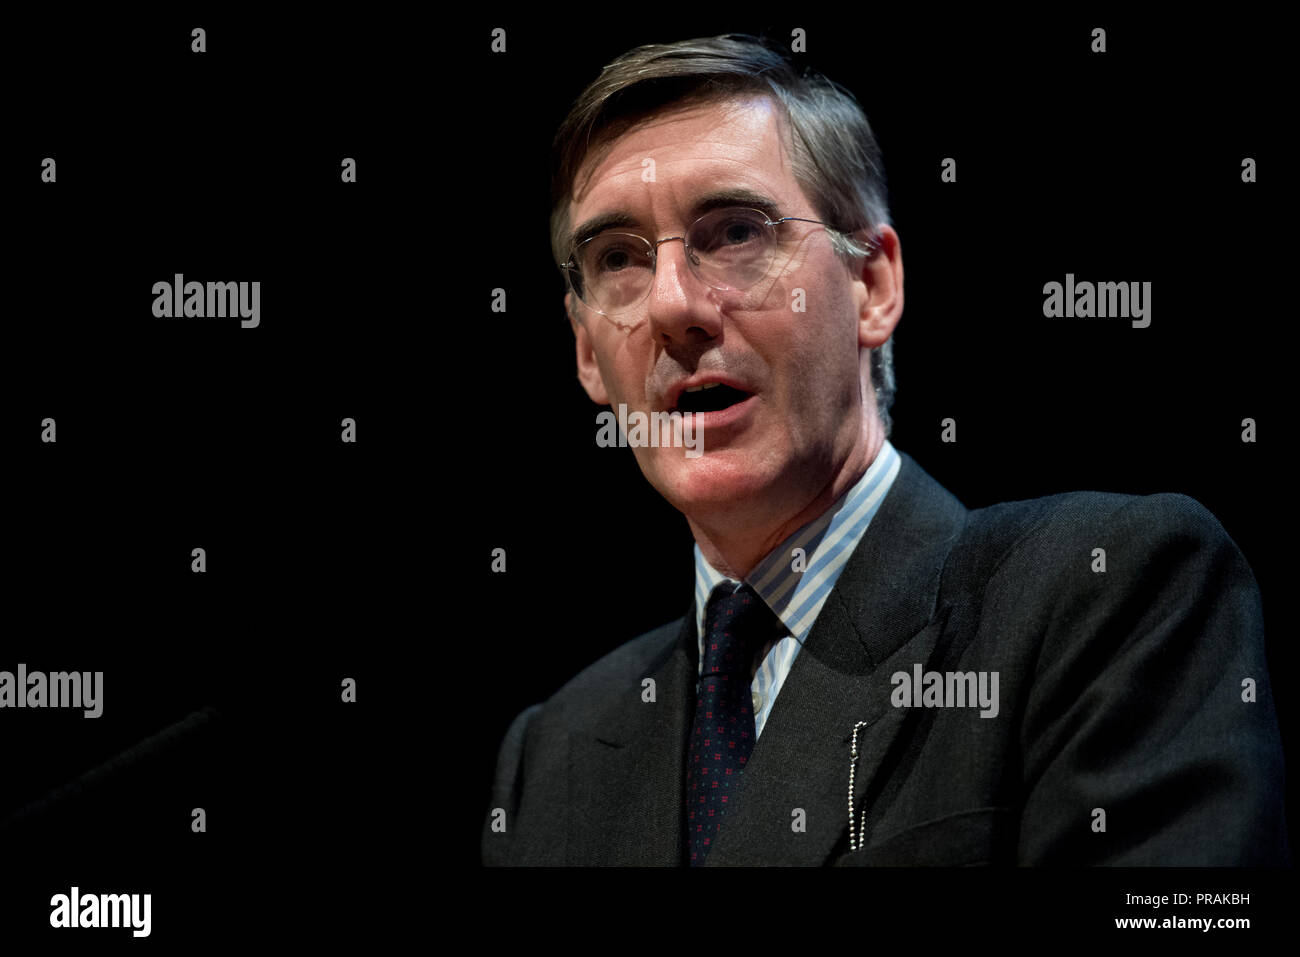 Birmingham, UK. 30th September 2018. Jacob Rees-Mogg, MP for North East Somerset, speaks at the Brexit Central fringe event at the Conservative Party Conference in Birmingham. © Russell Hart/Alamy Live News. Stock Photo